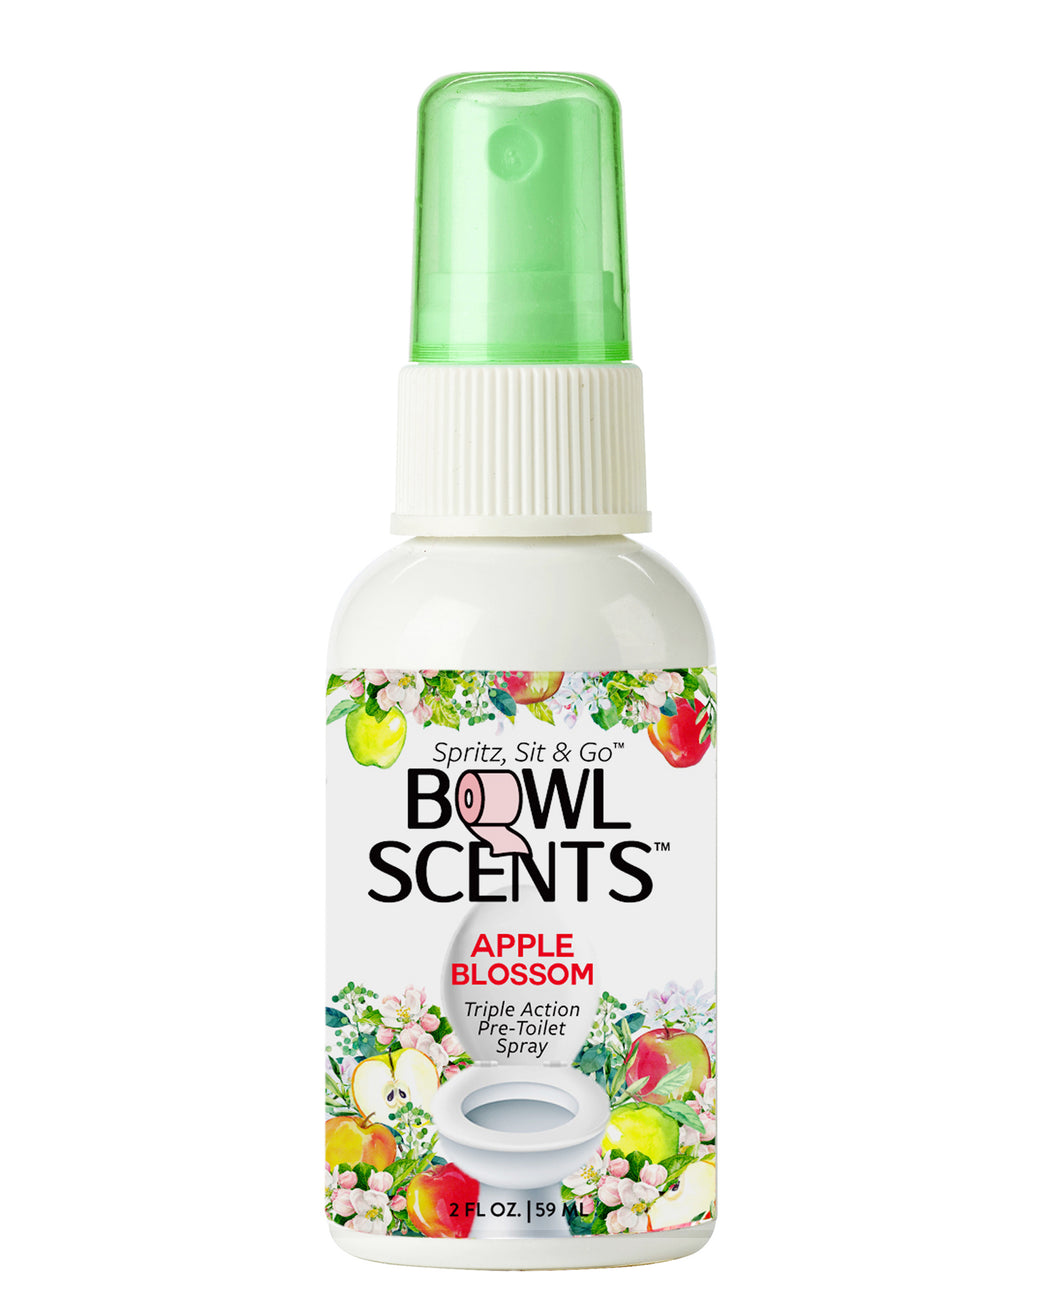 Bowl Scents 2 oz mini prevents nasty poop smells. Just spray into the bowl before you sit. It traps smell odor in the bowl. Now use any bathroom with confidence